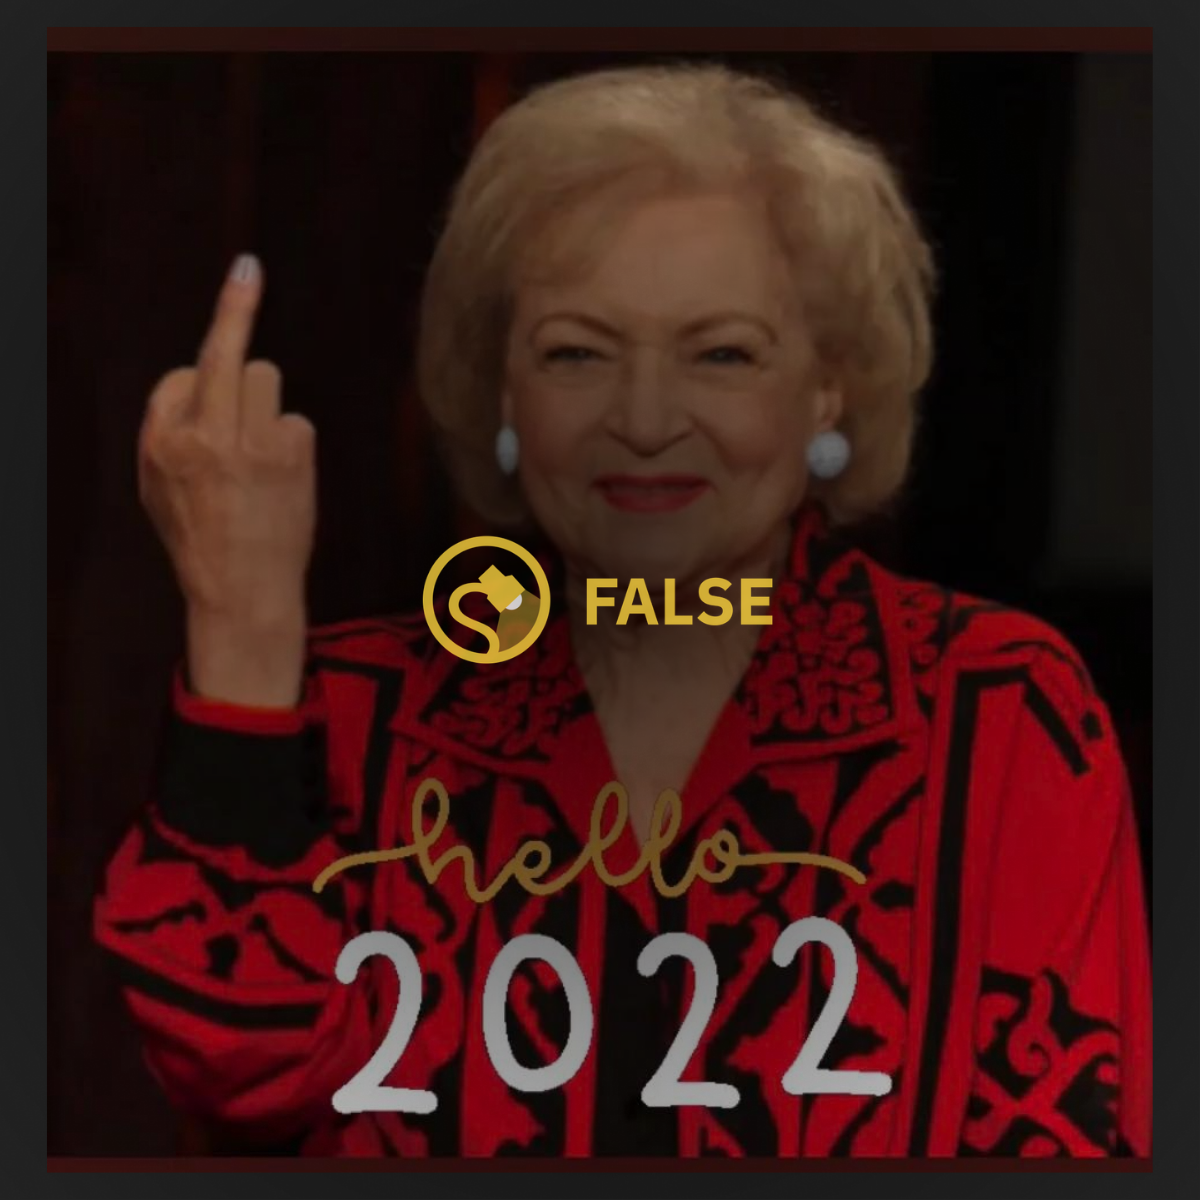 betty white middle finger flipping the bird